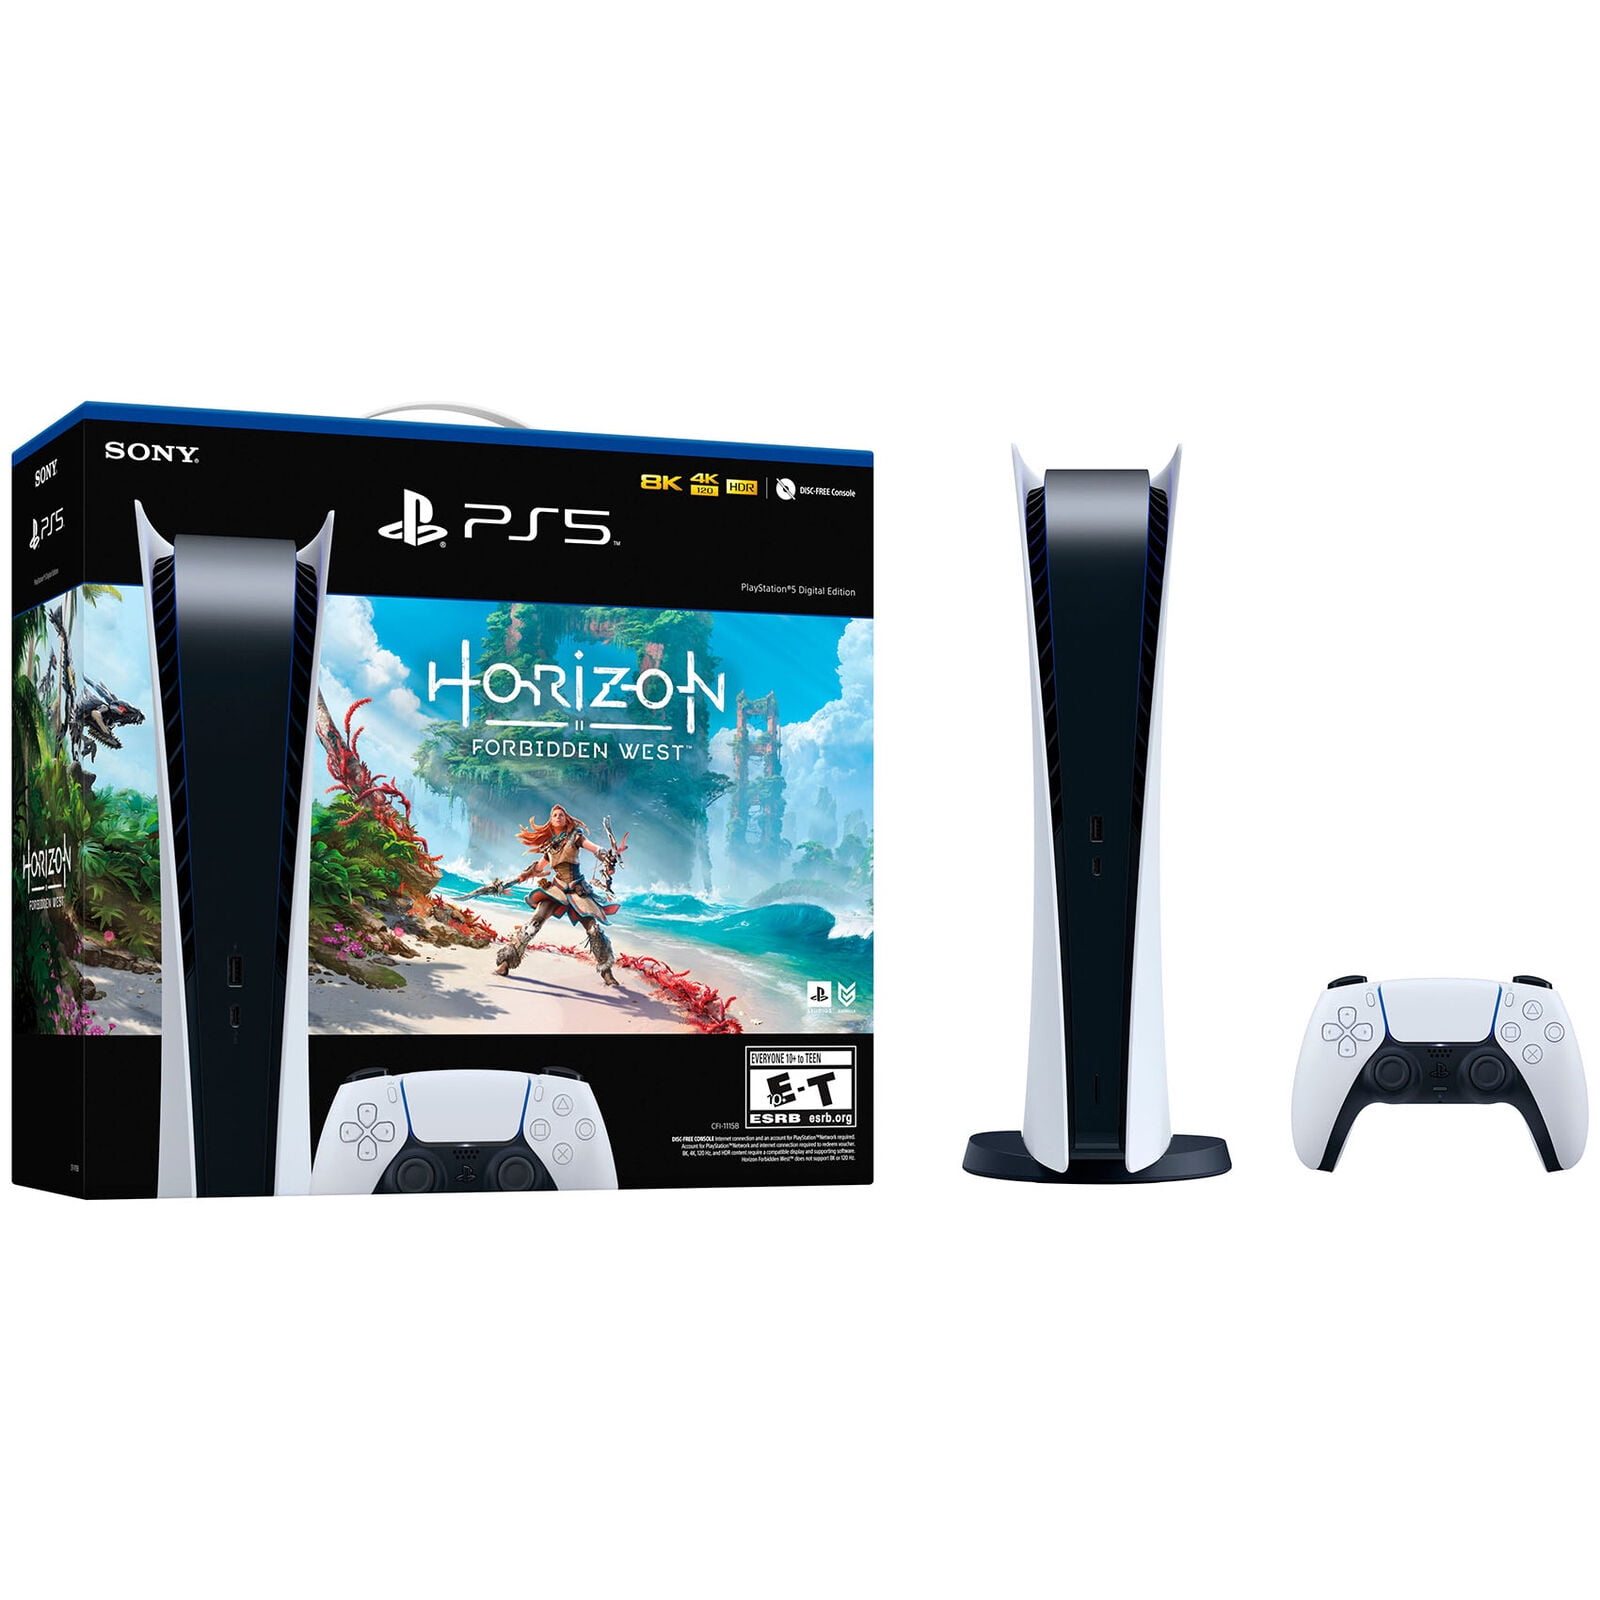 Sony PlayStation_PS5 Video Game Console (Digital Edition) with Horizon: Forbidden West Game Bundle - Walmart.com